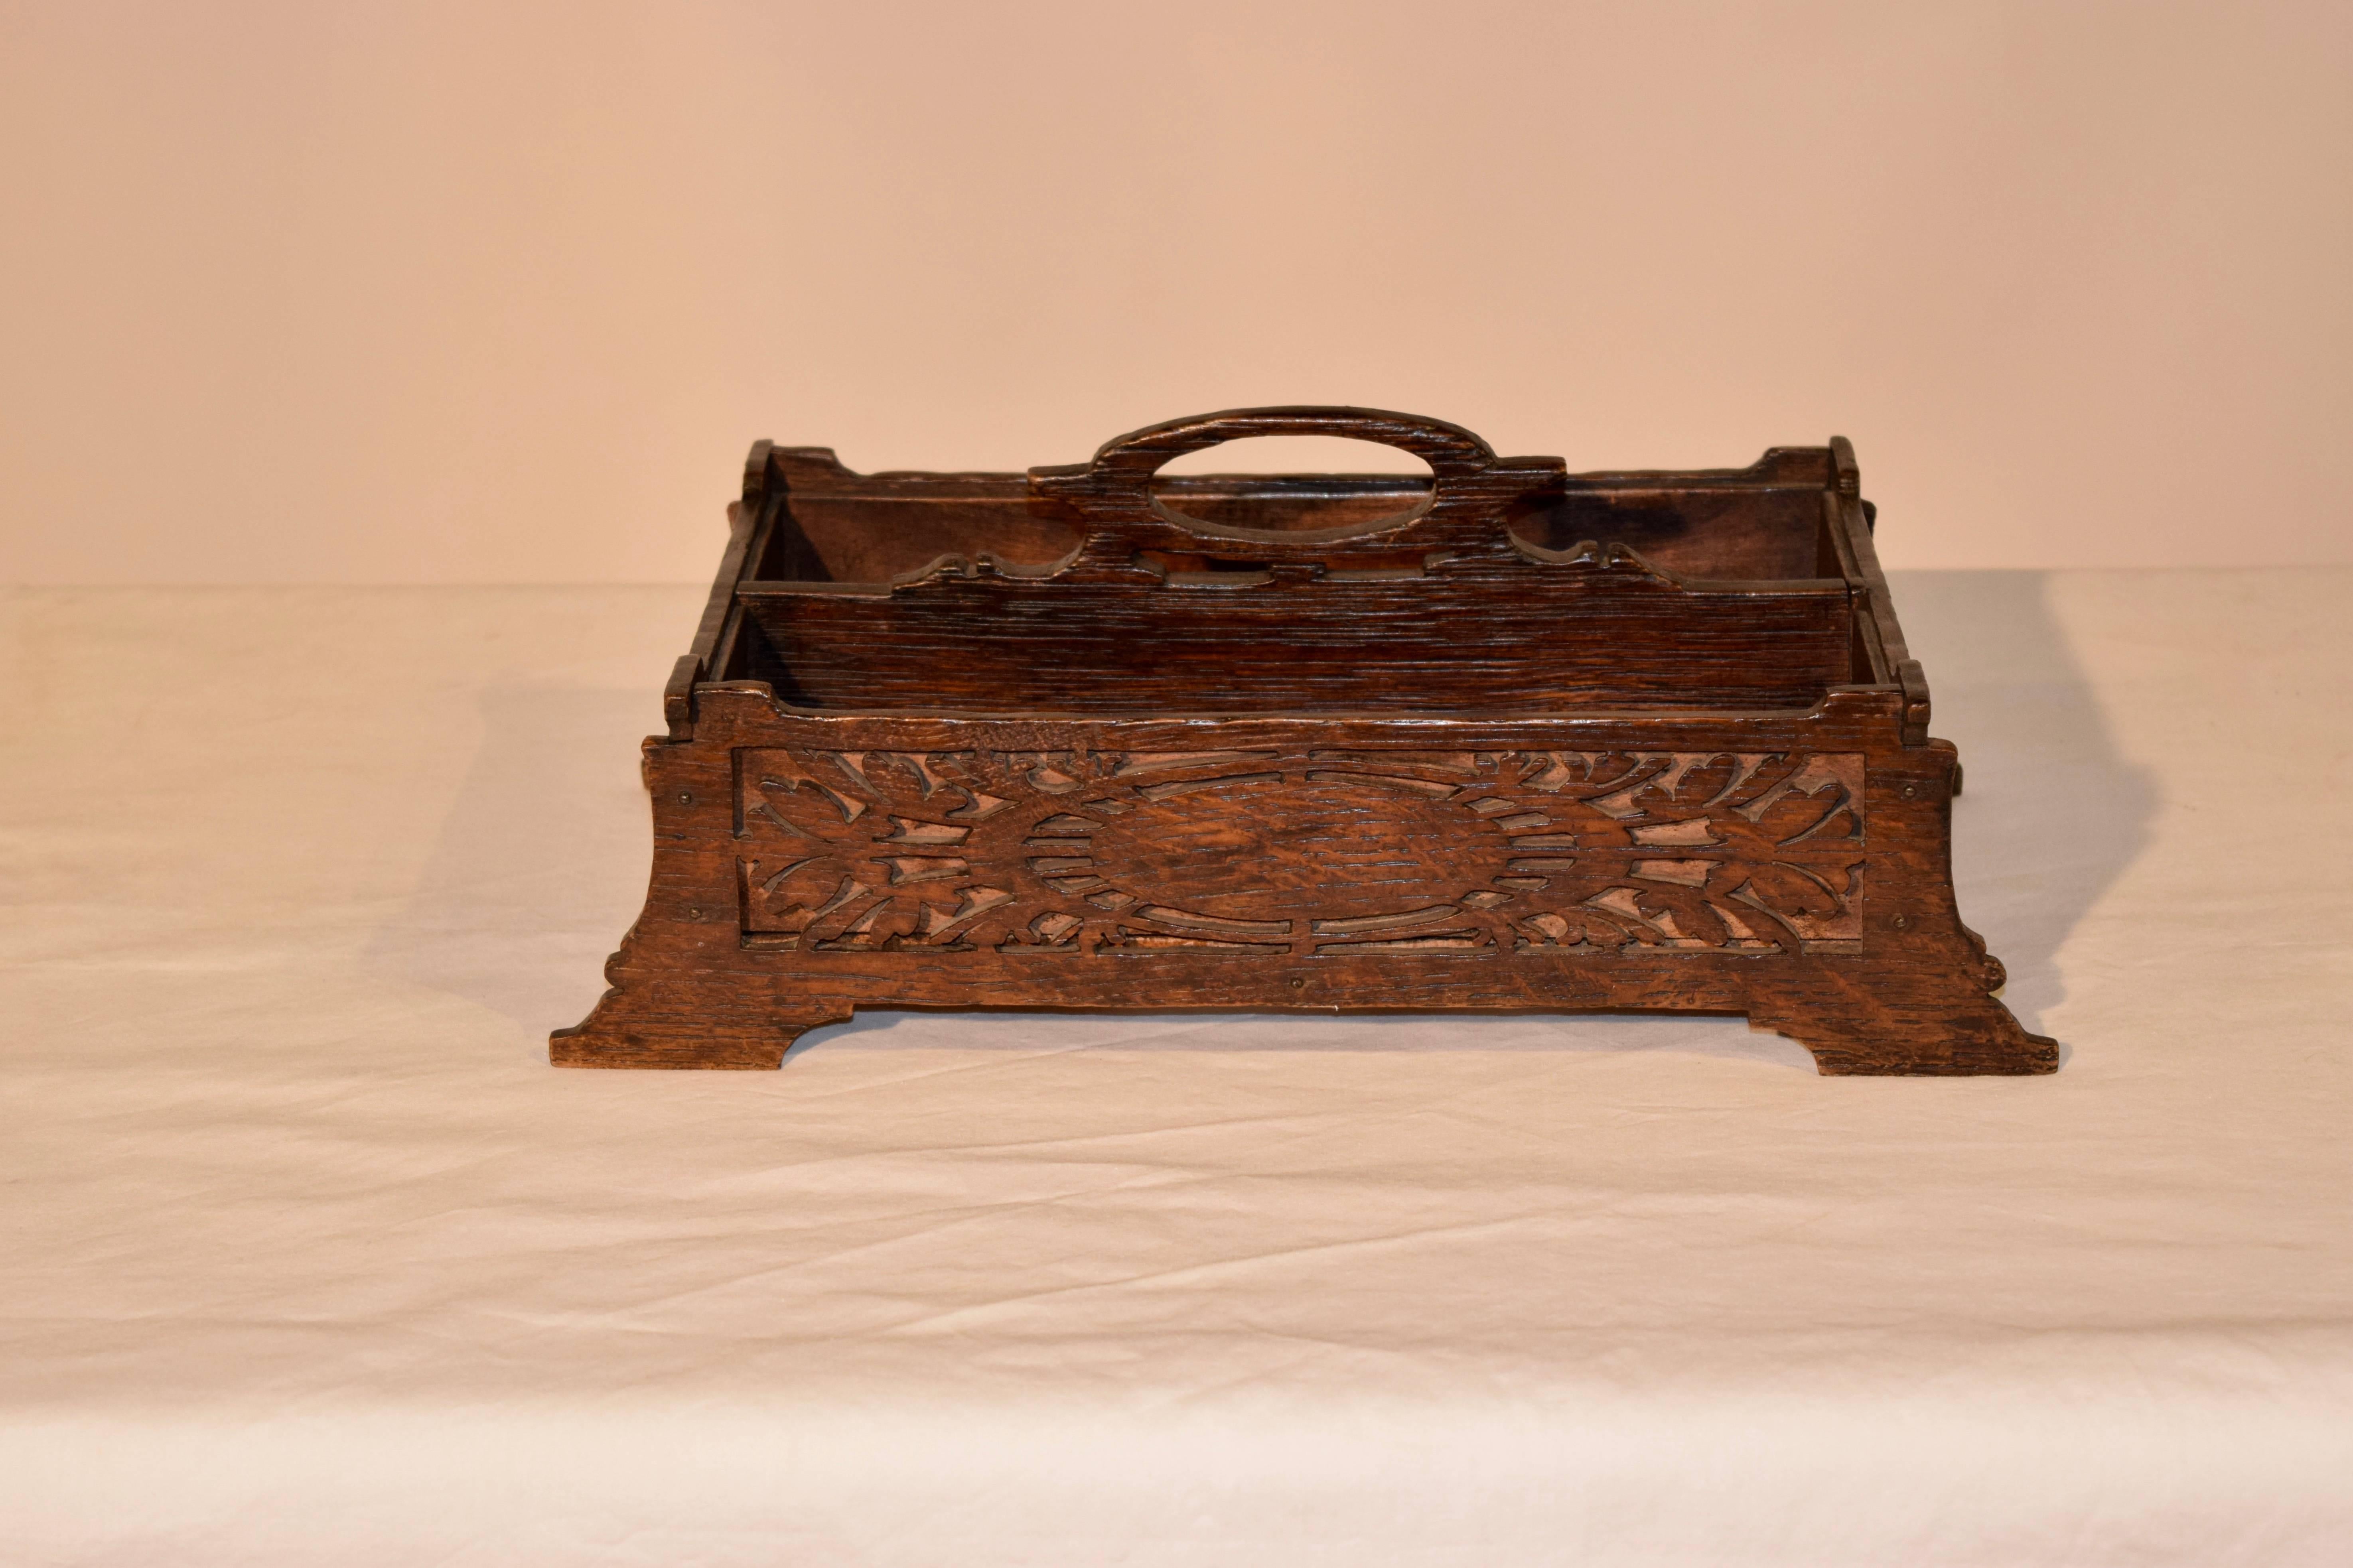 19th century English oak cutlery tray with hand pierced decoration and a felt lined interior.